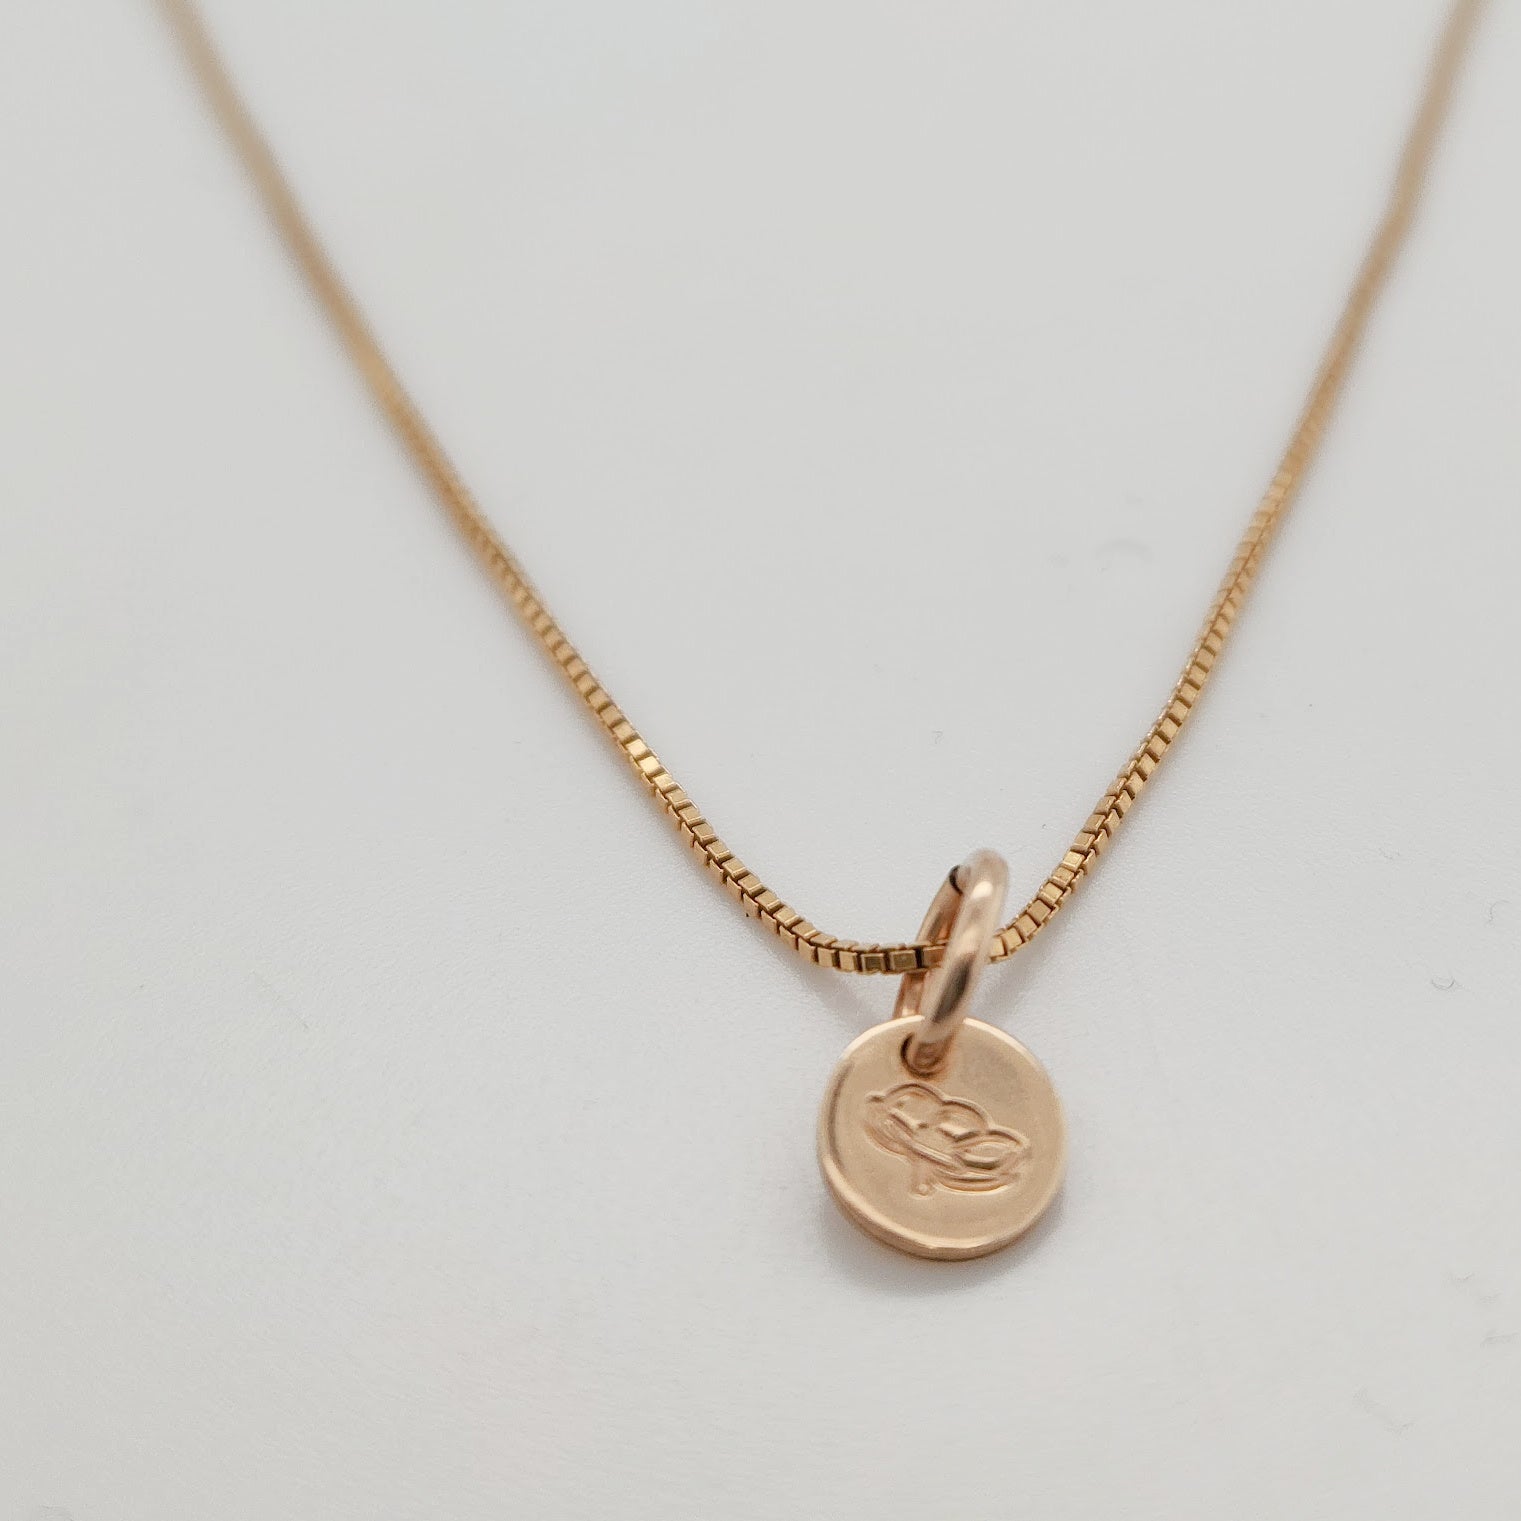 Minimalist Tag Necklace - Going Golden